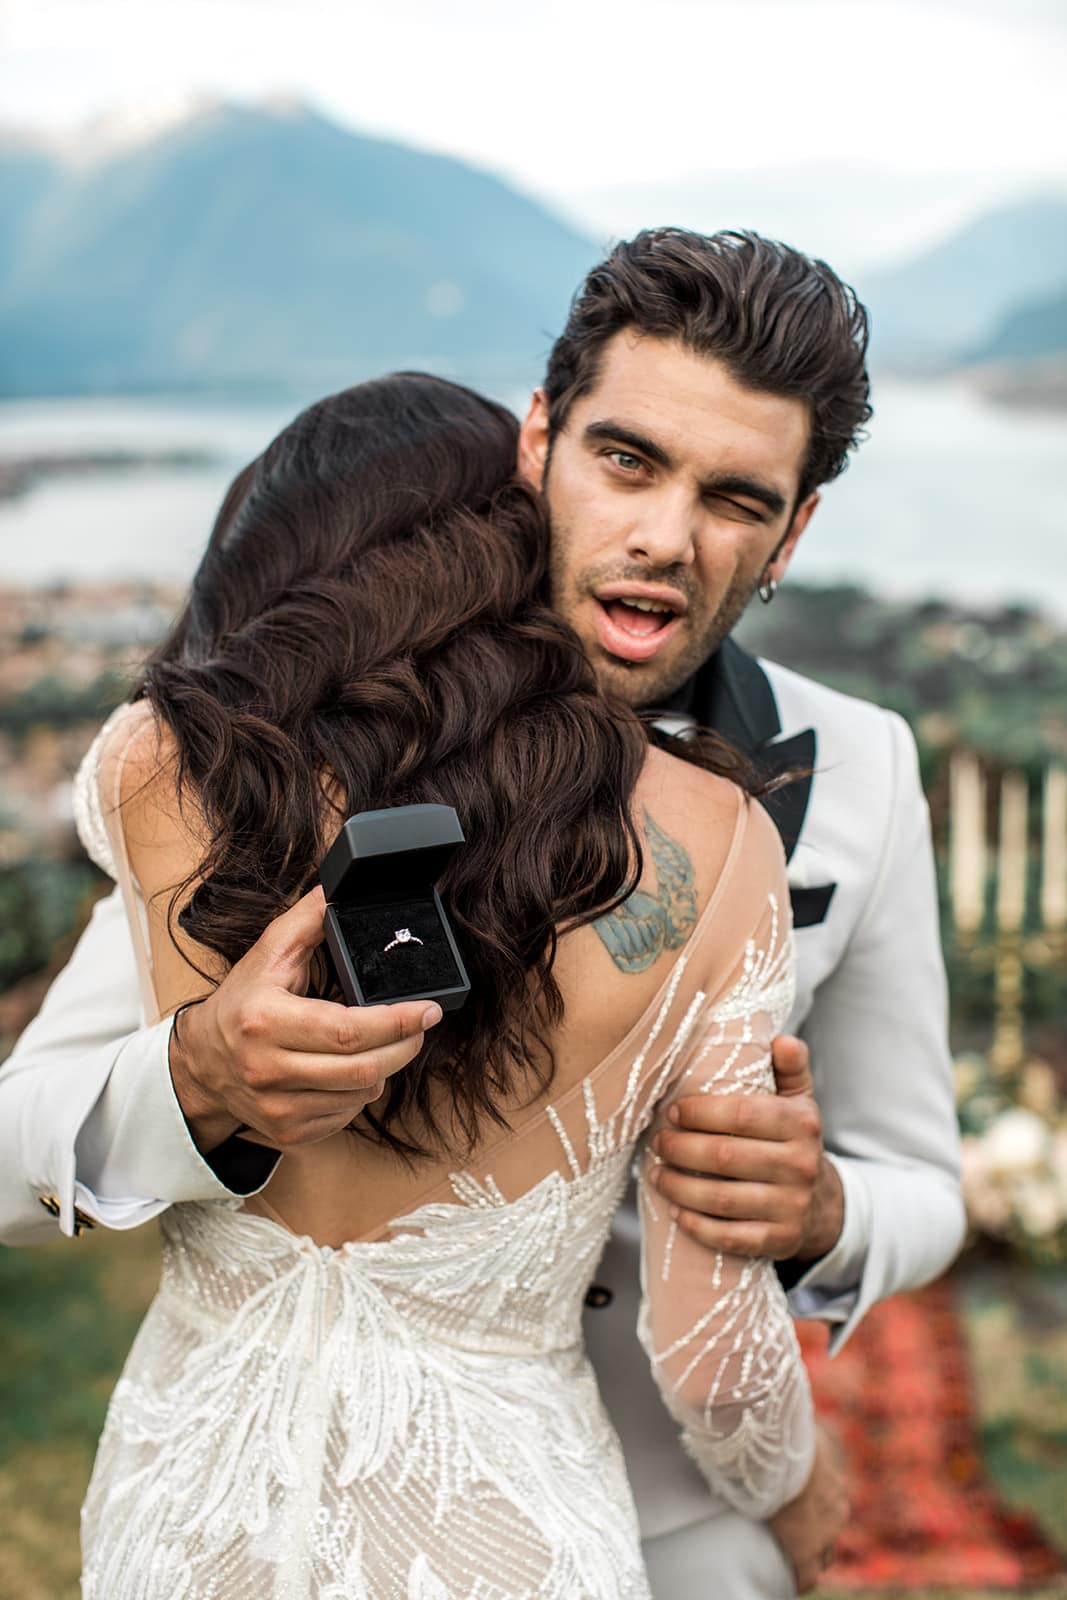 Groom shows ring to camera behind bride's back